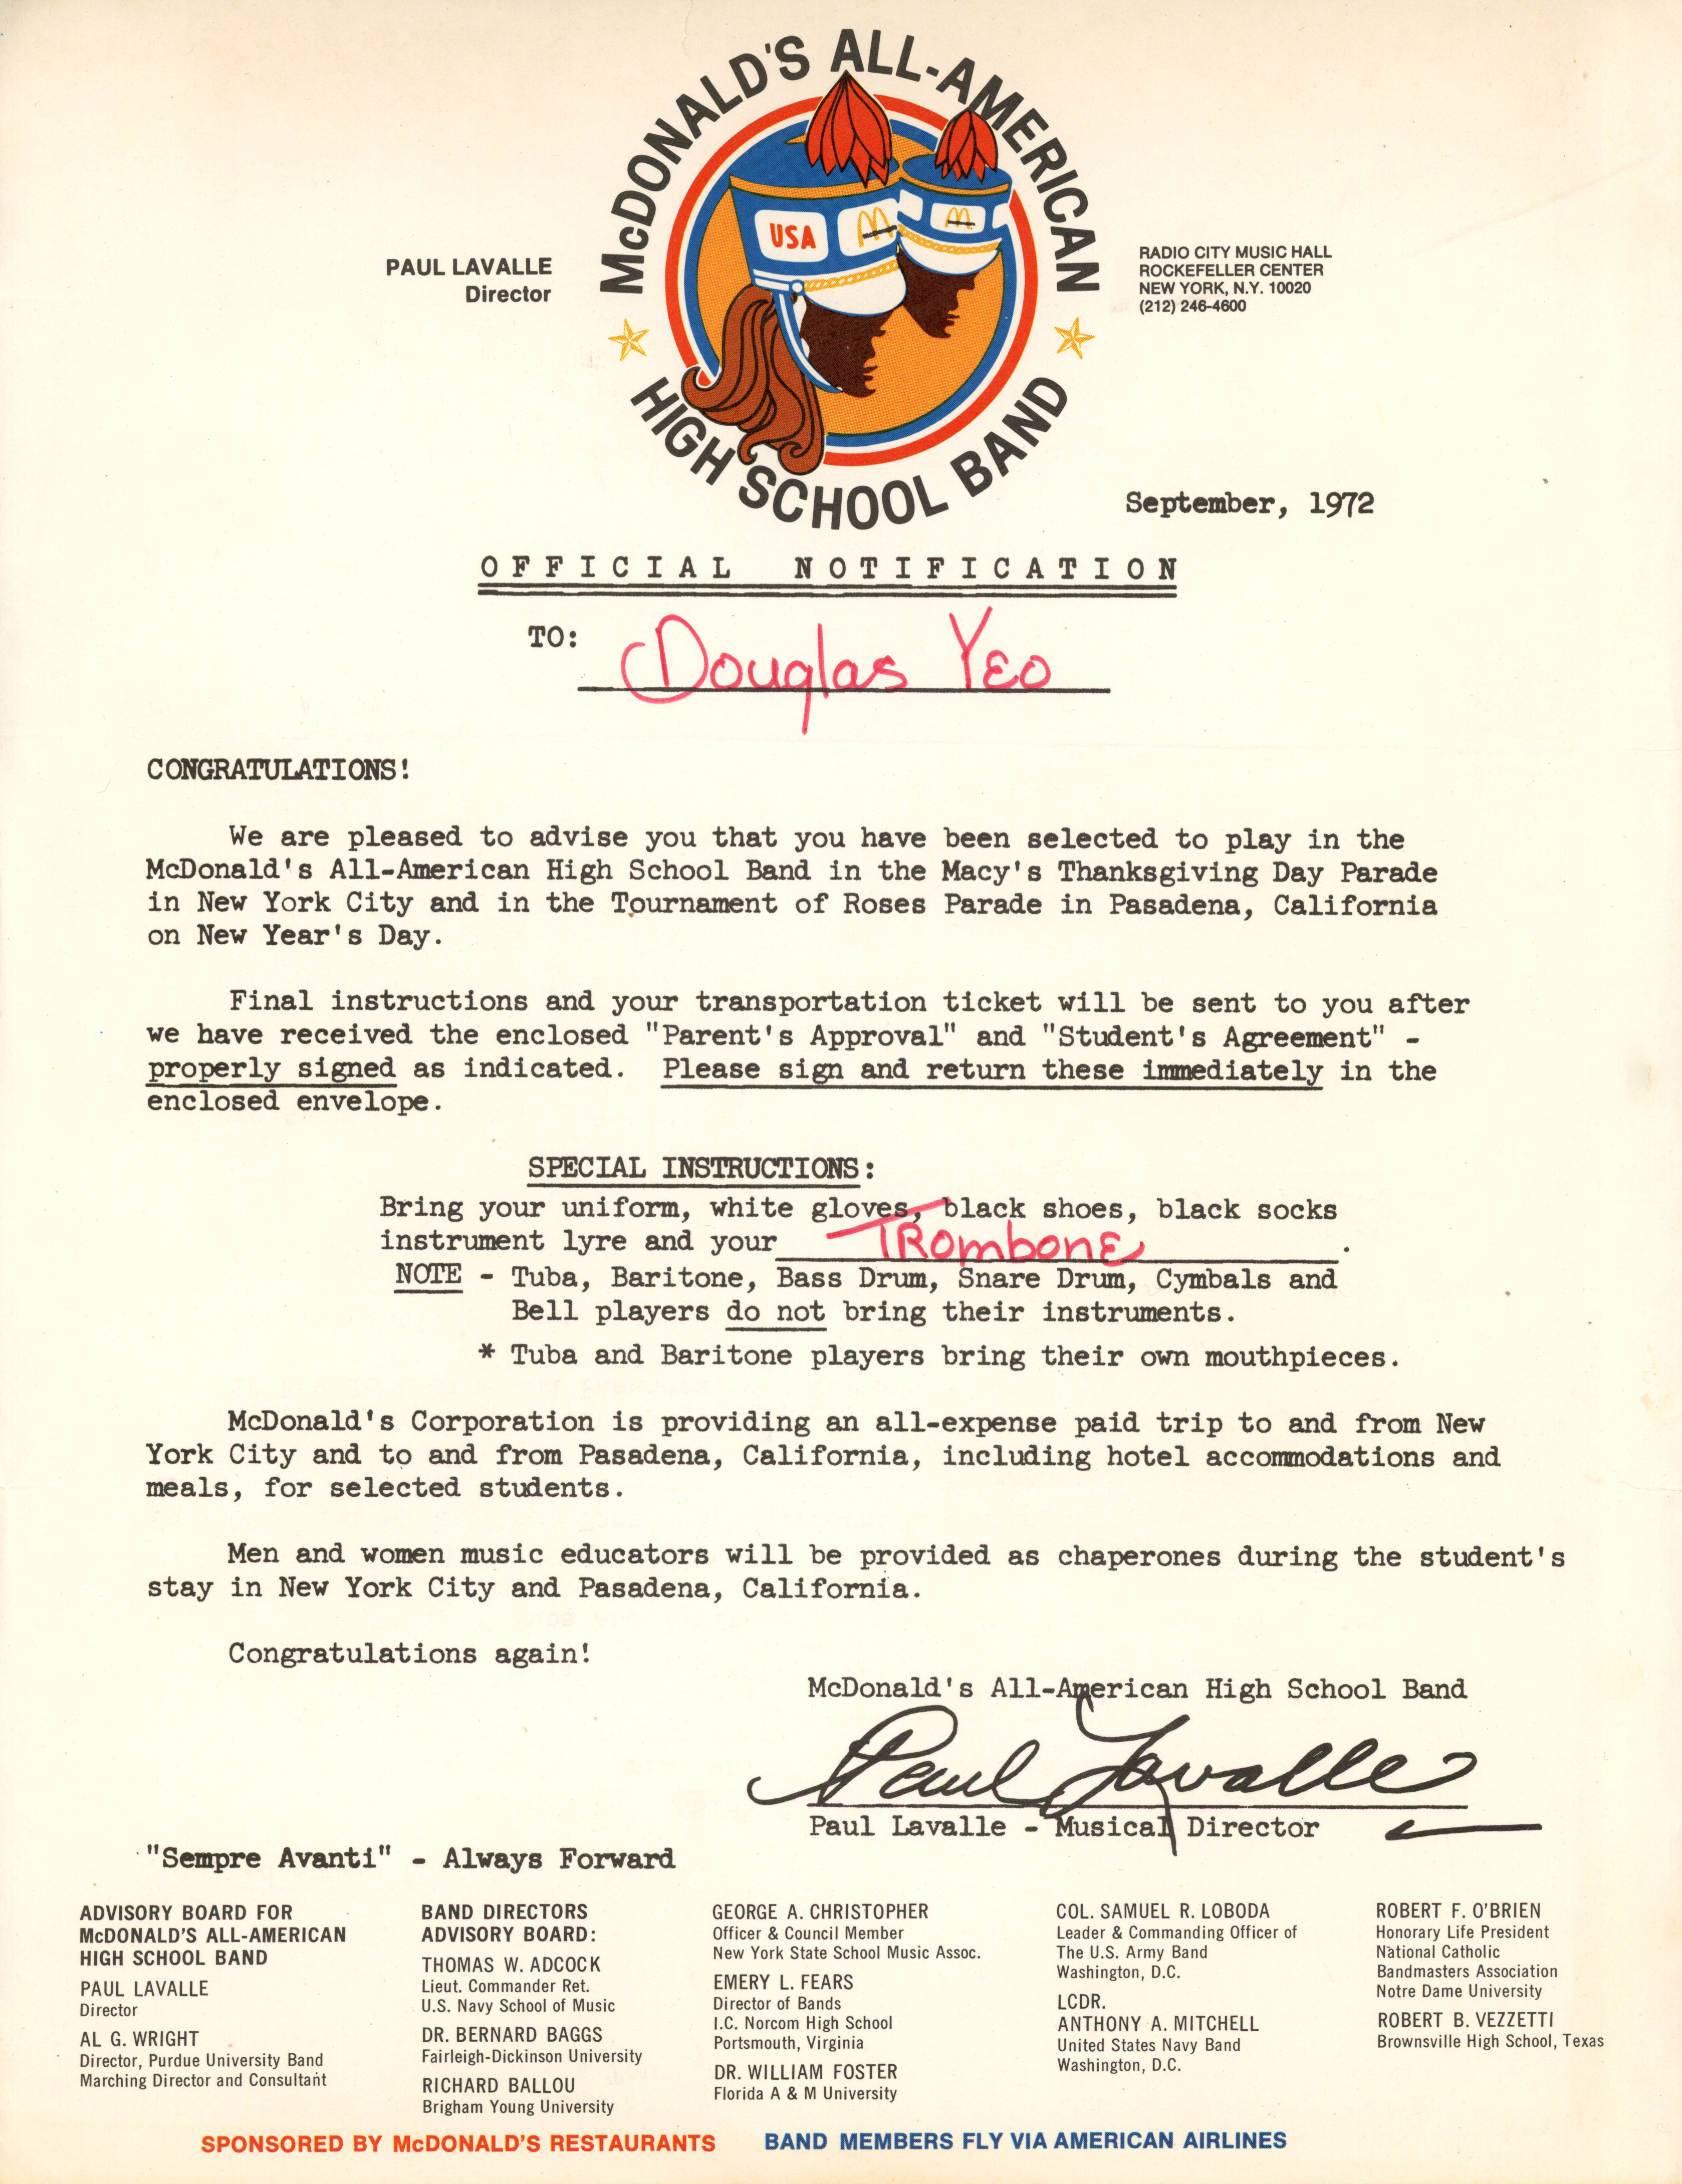 Yeo_McDonald's_All_AMerican_Band_letter_1972